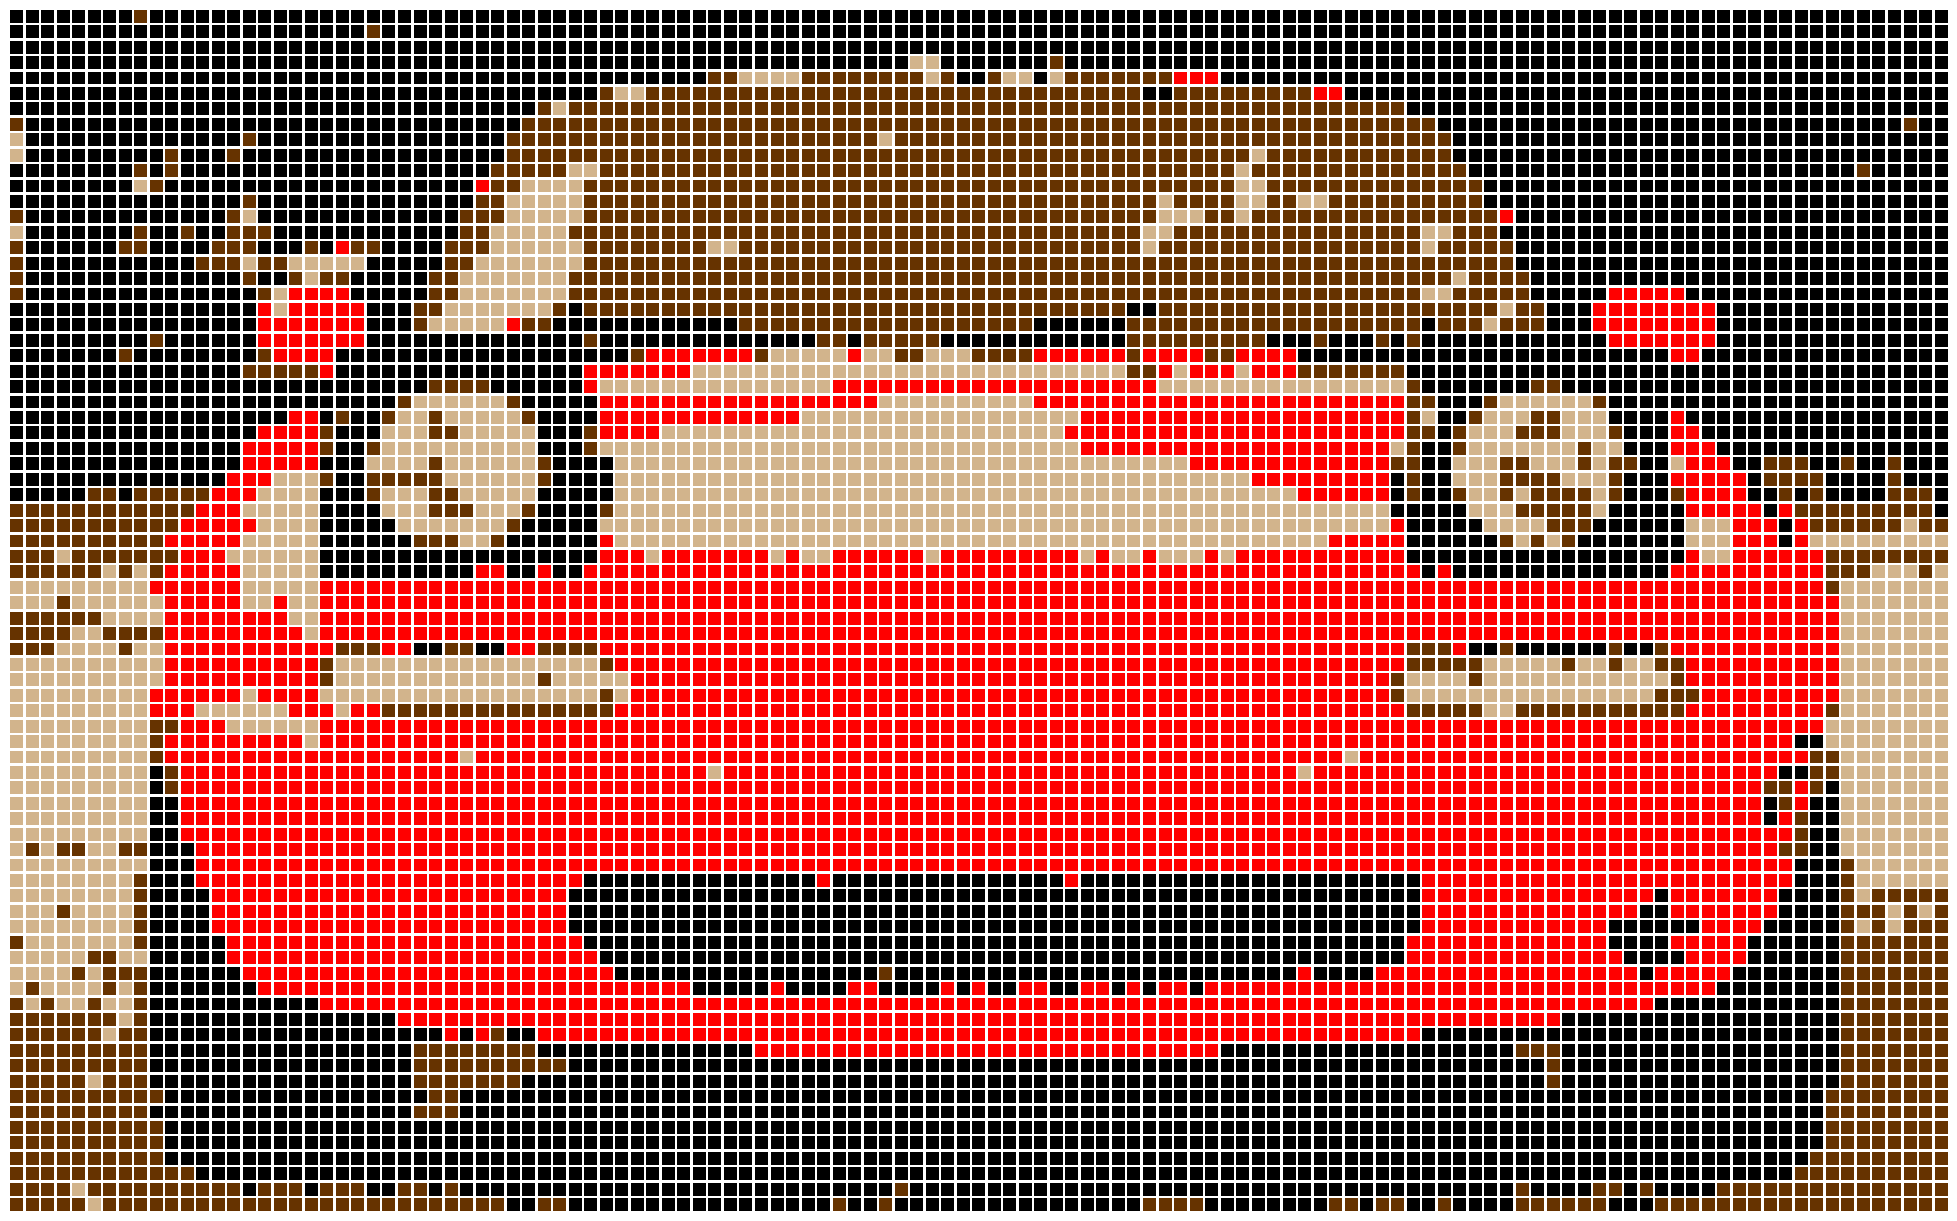 pixelated Miata with manually adjusted centroids